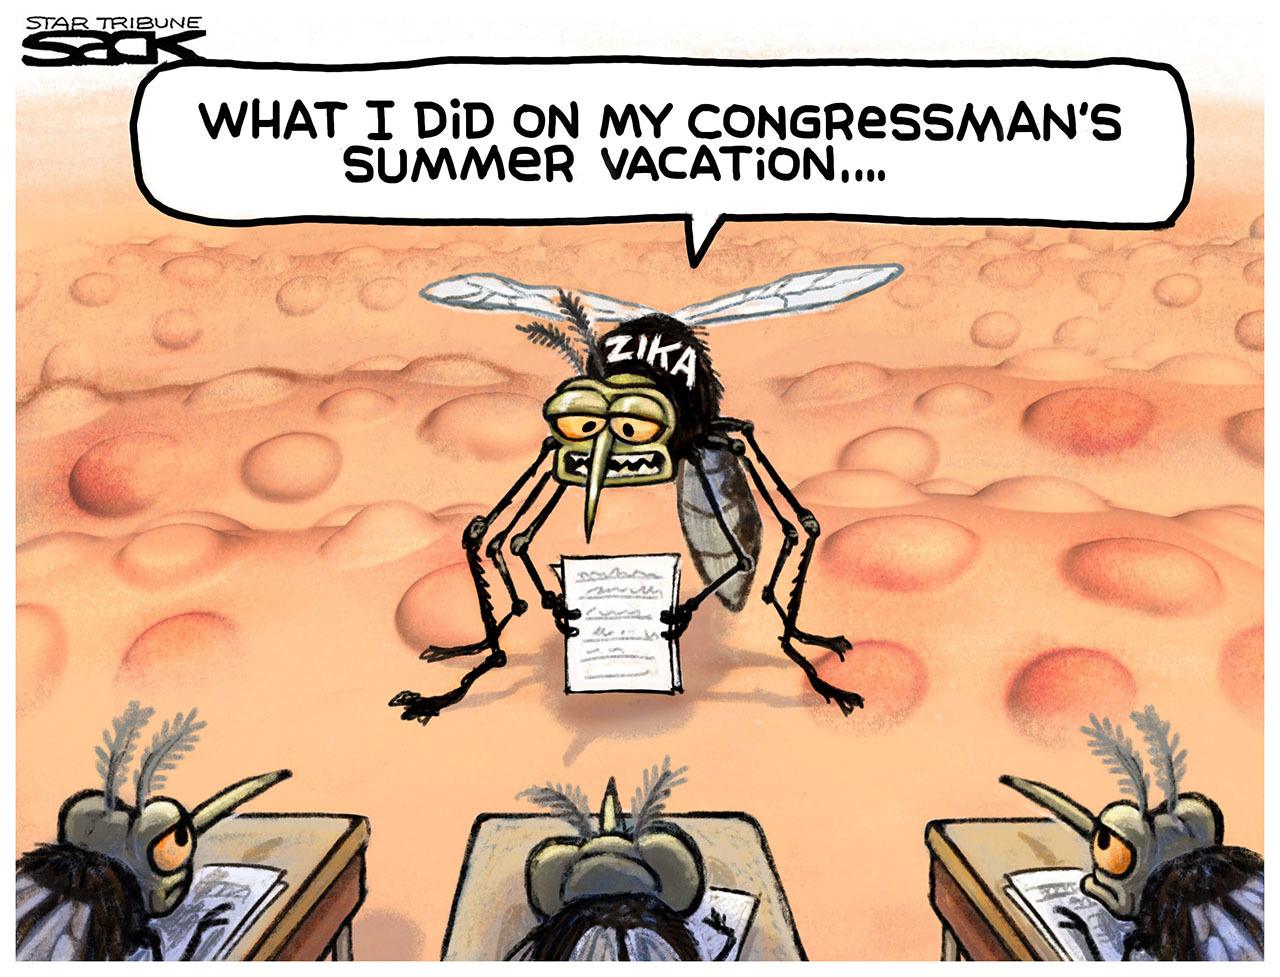 Editorial cartoons for Aug. 27 and 28